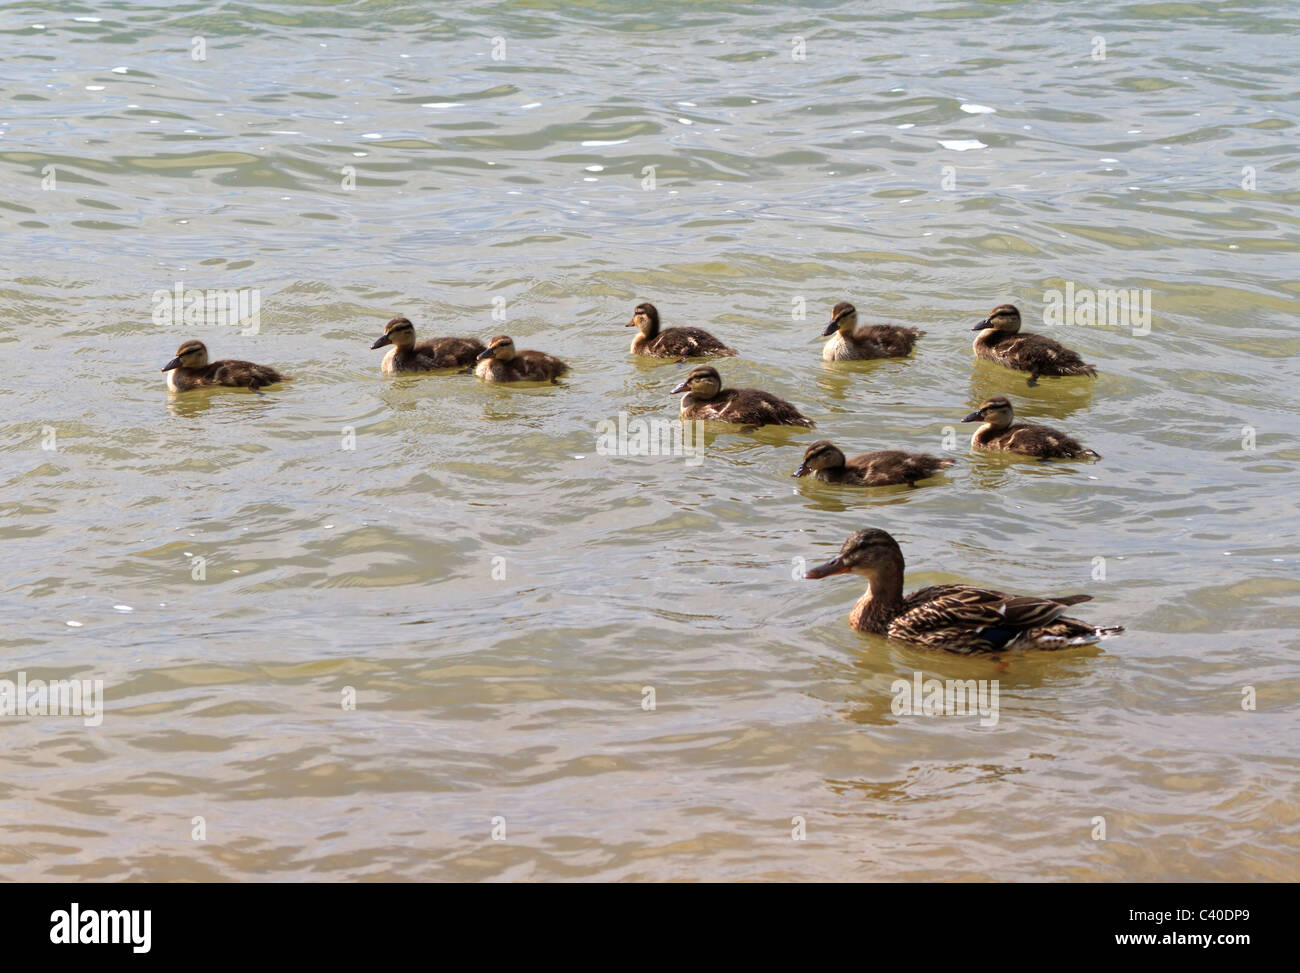 Female Mallard Duck, Anas platyrhynchos, with babies. Nine baby ducks swimming at the edge of the lake with their mother. Stock Photo